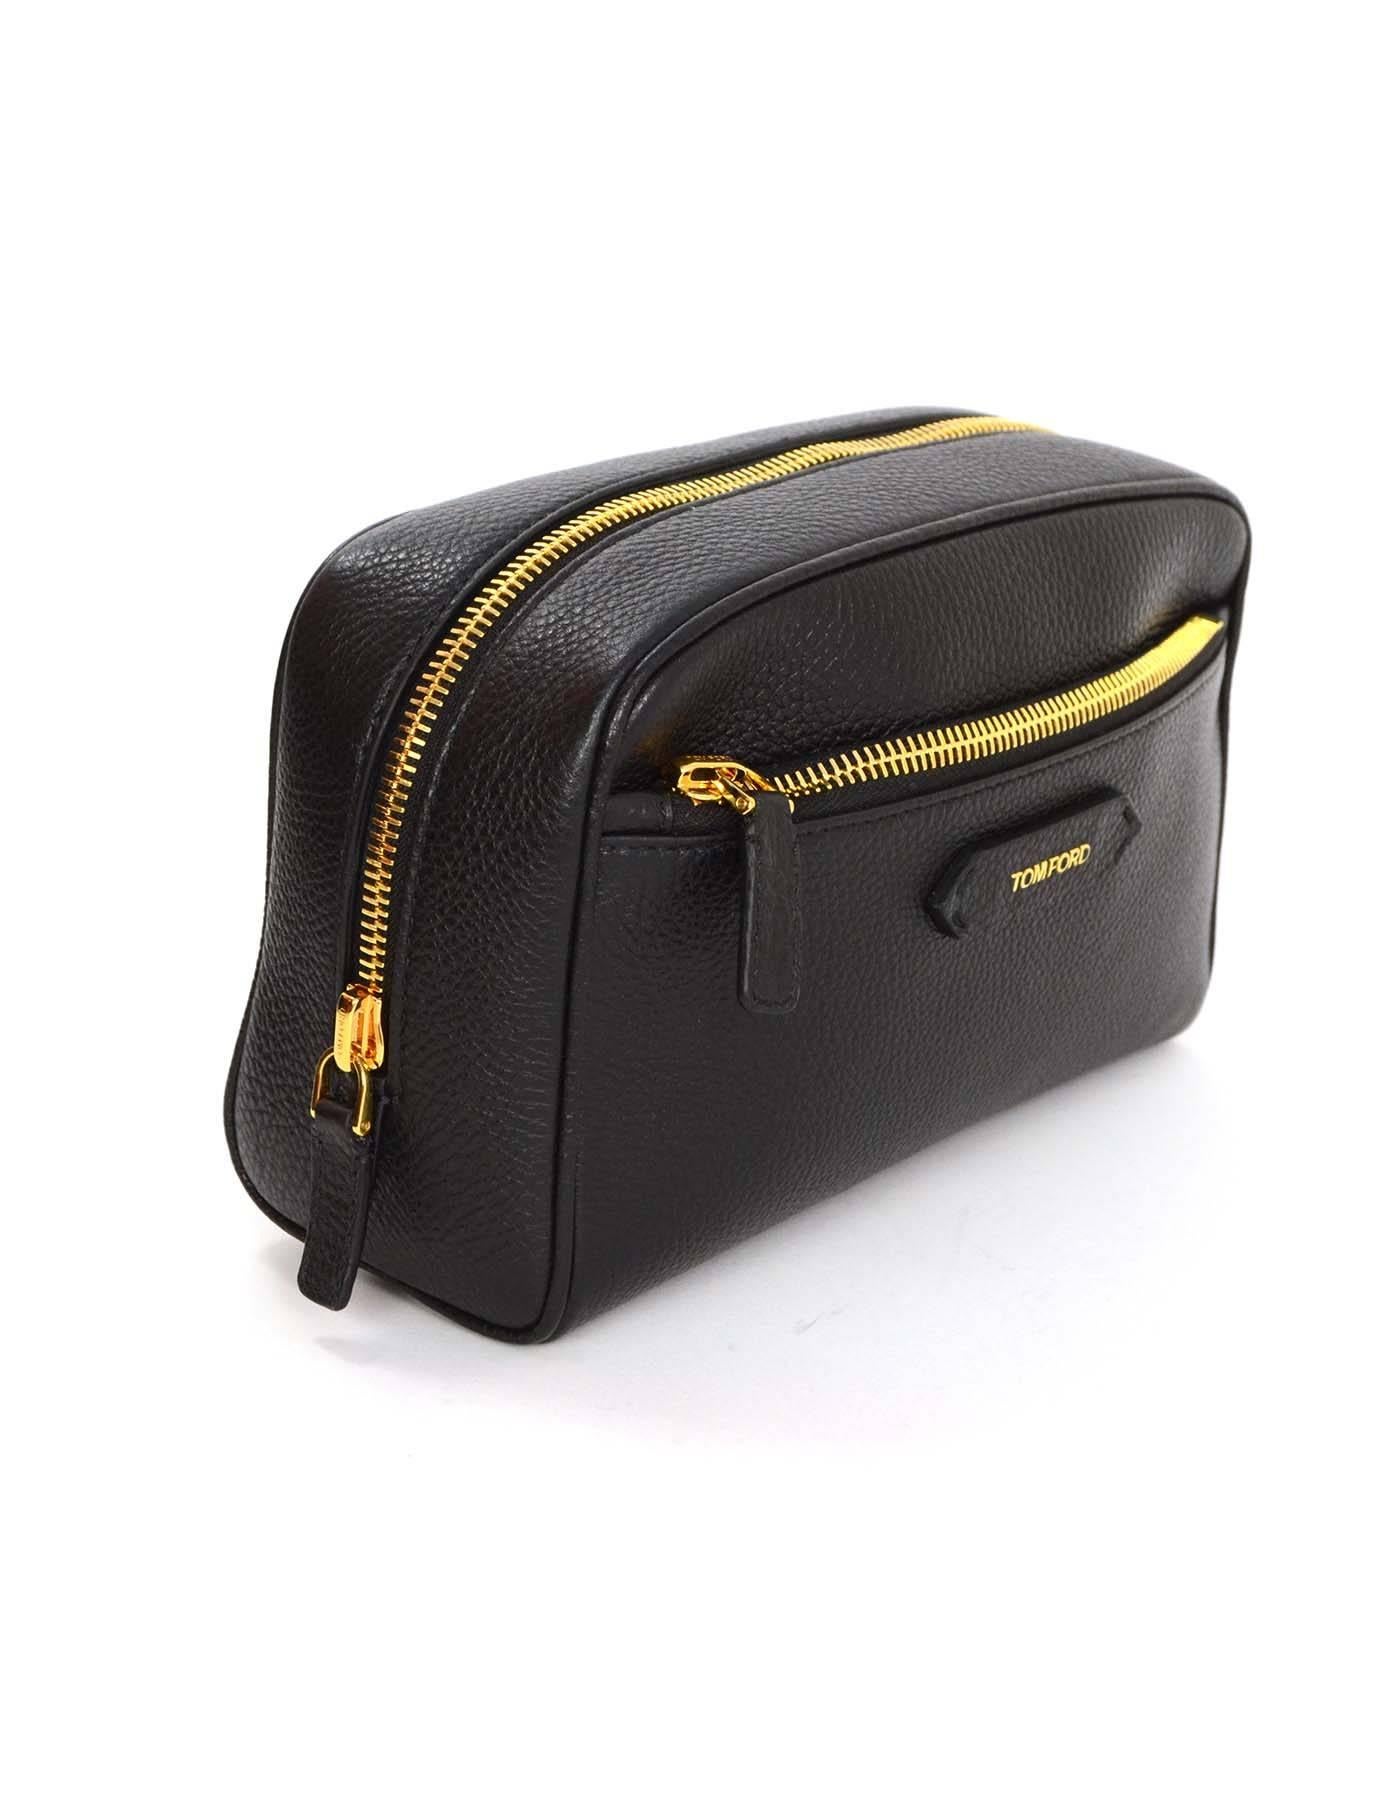 Tom Ford Black Leather Toiletry Bag 
Features leather tab on front with Tom Ford logo in goldtone
Made In: Italy
Color: Black
Hardware: Goldtone
Materials: Leather
Lining: Black grosgrain
Closure/Opening: Zip across top
Exterior Pockets: One